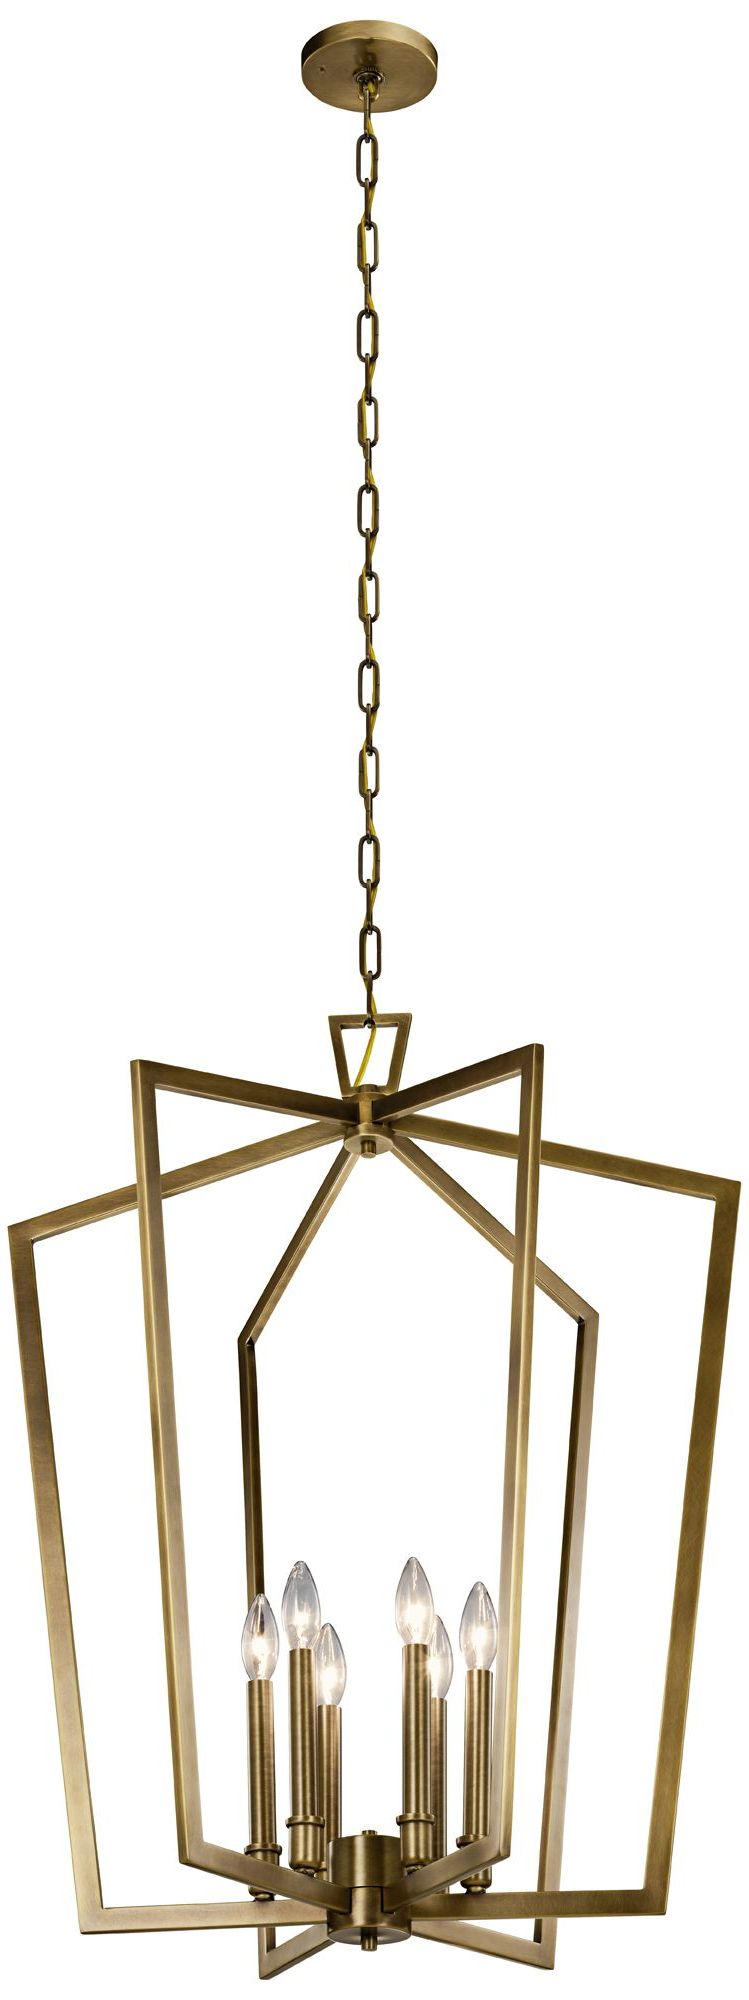 Kichler Abbotswell 24 3/4" Wide Natural Brass 6 Light Foyer Pendant –  Walmart For Widely Used Natural Brass Foyer Lantern Chandeliers (View 1 of 15)